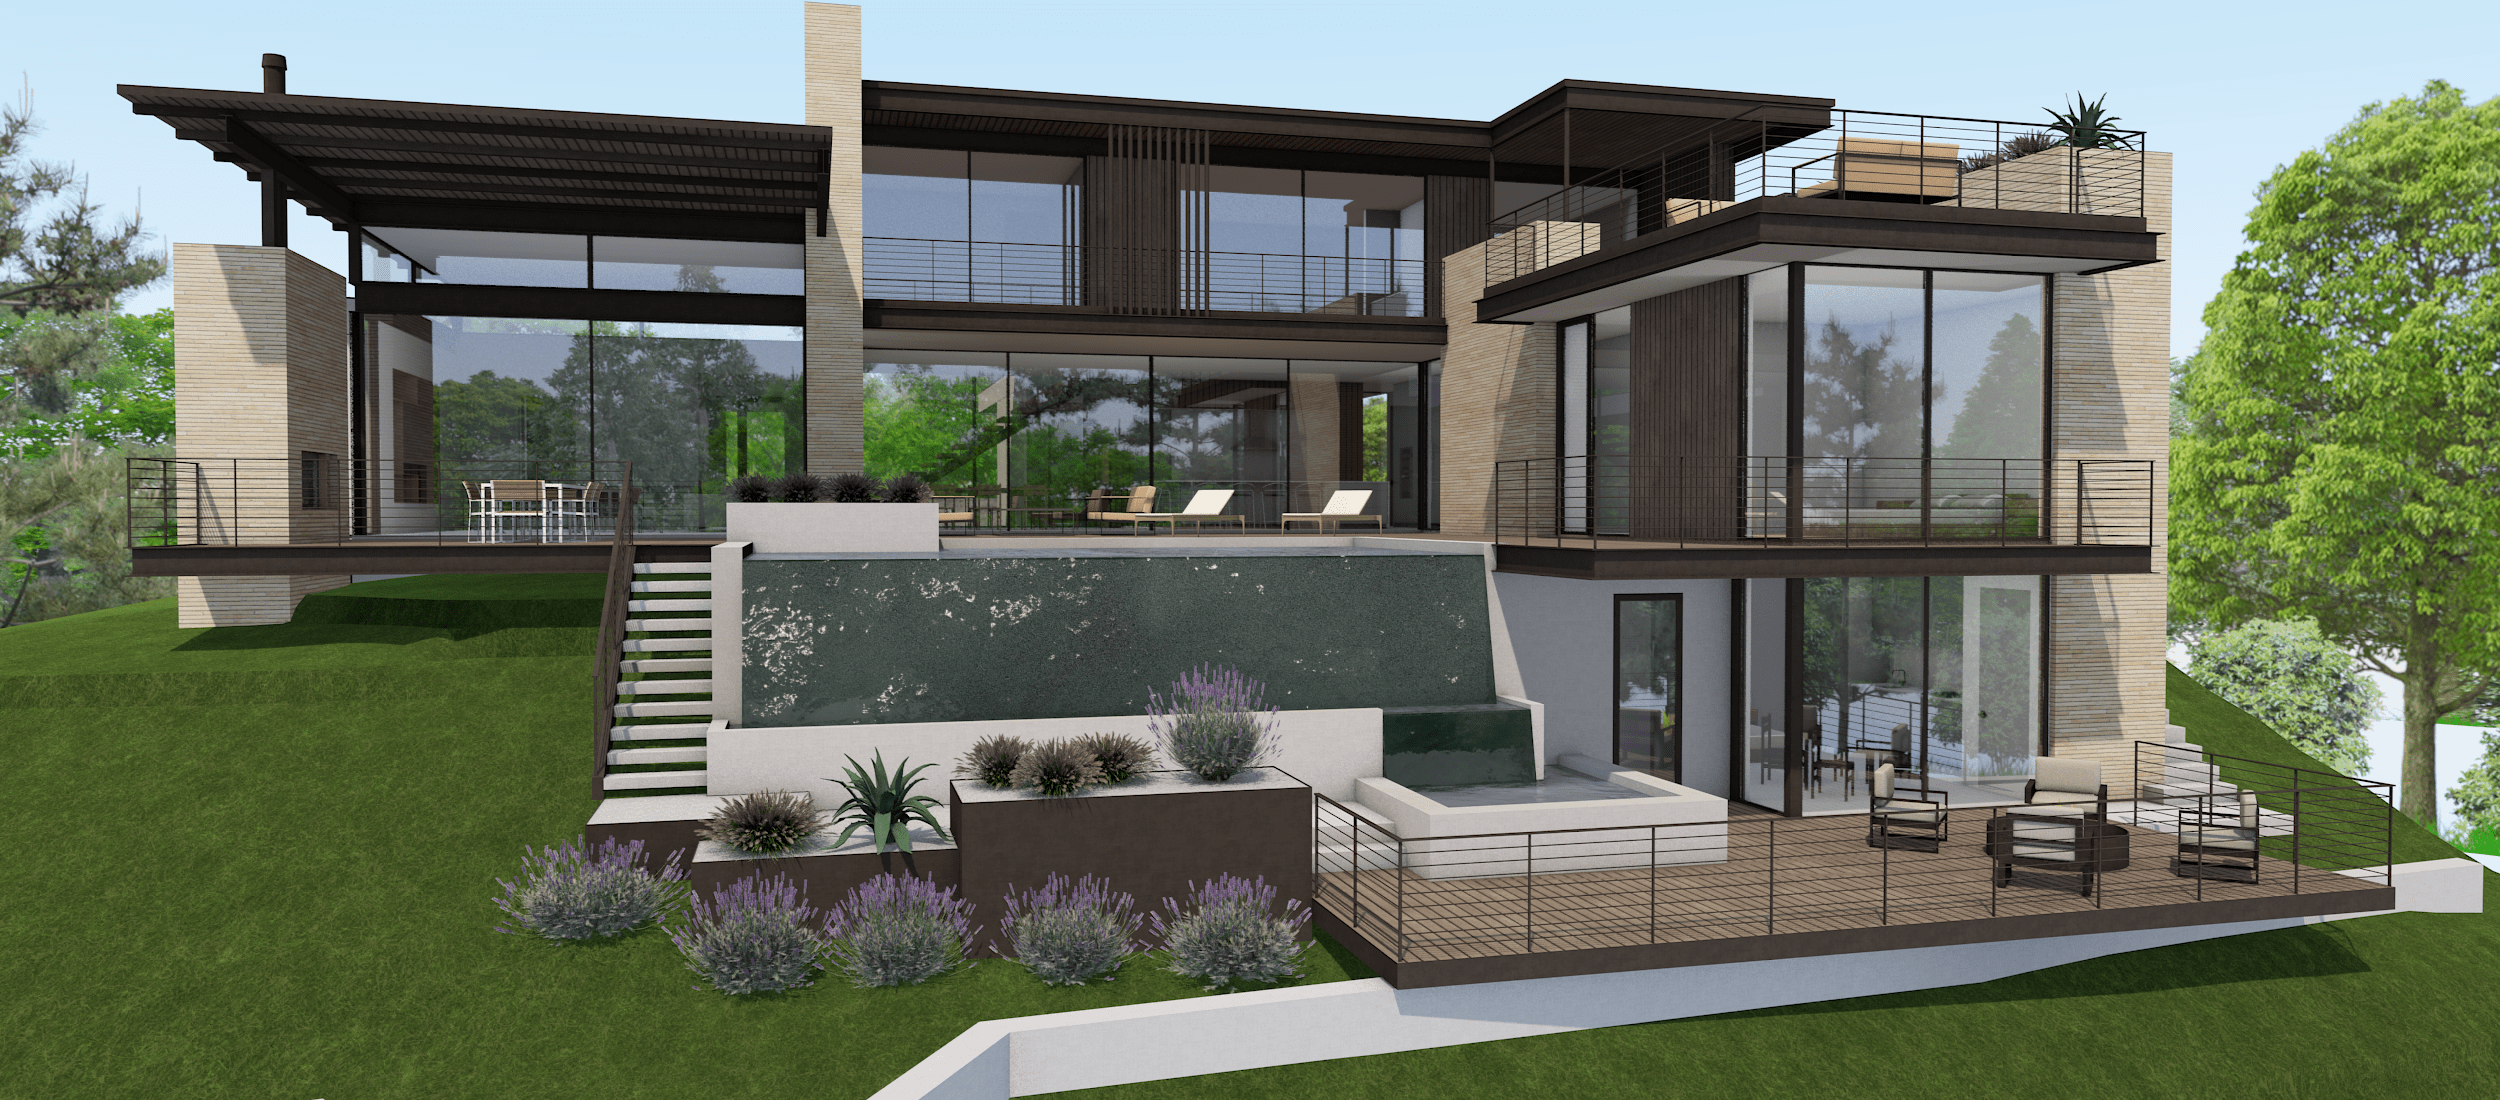 Rendering of Glenview Home by Jay Corder Architect